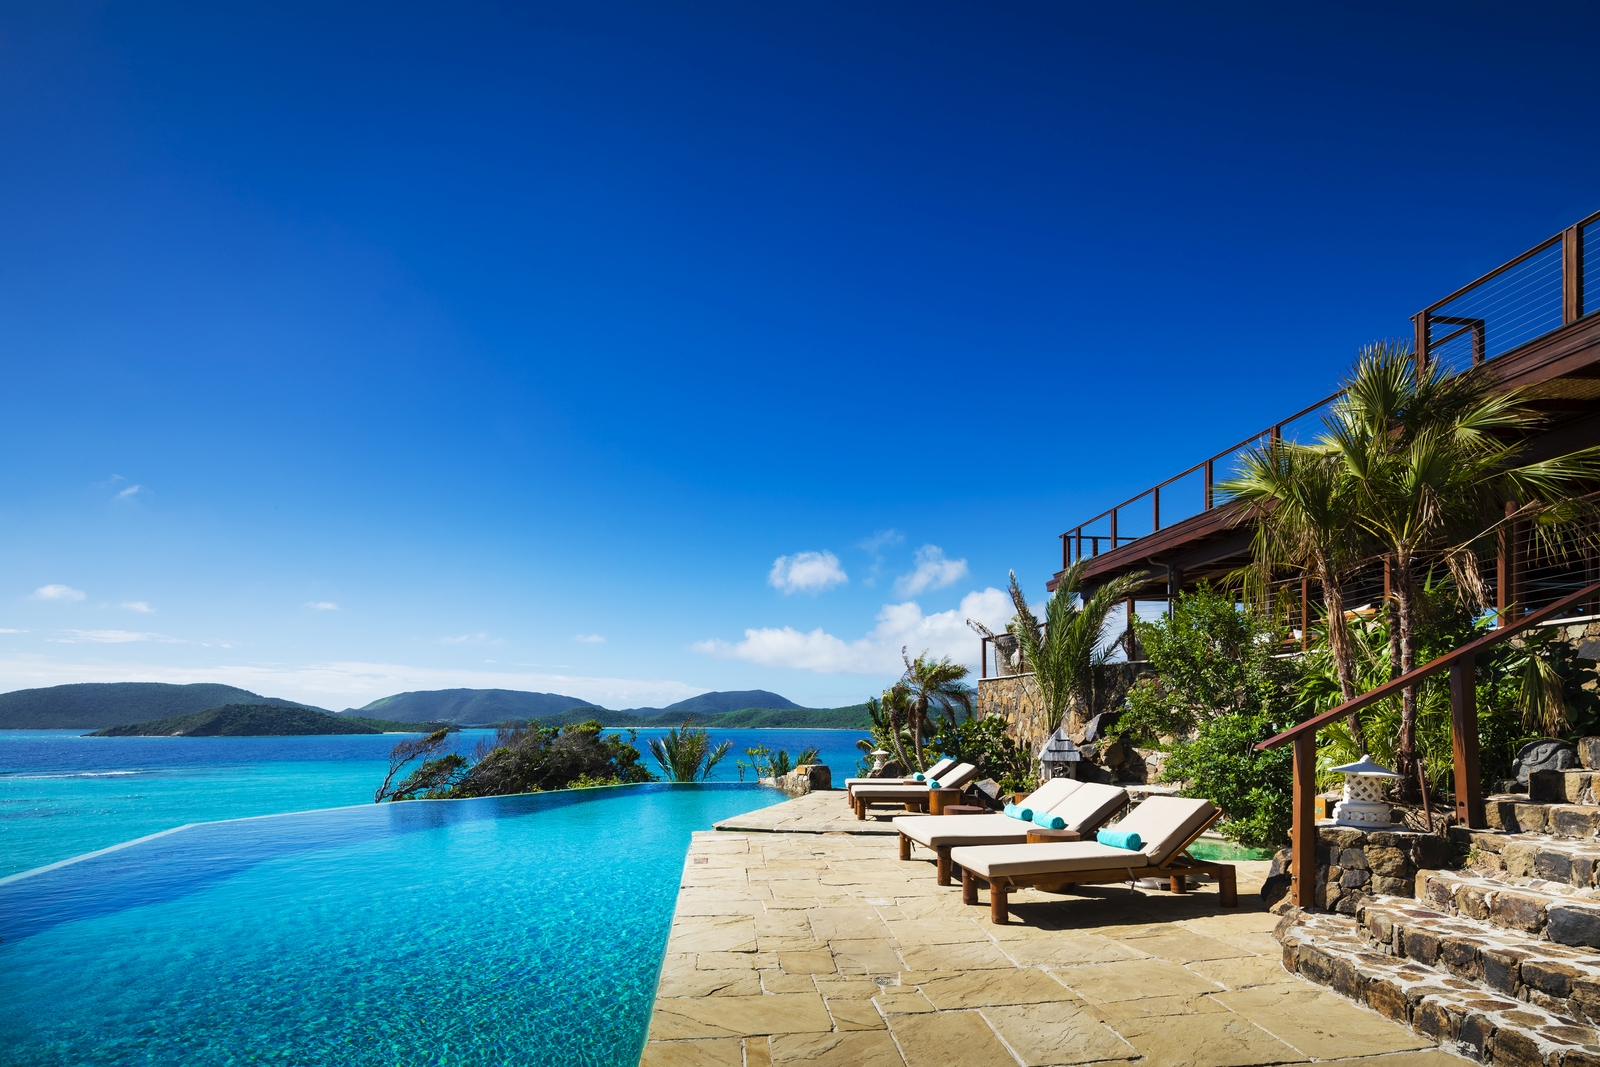 Pool with loungers at The Great House at Necker Island